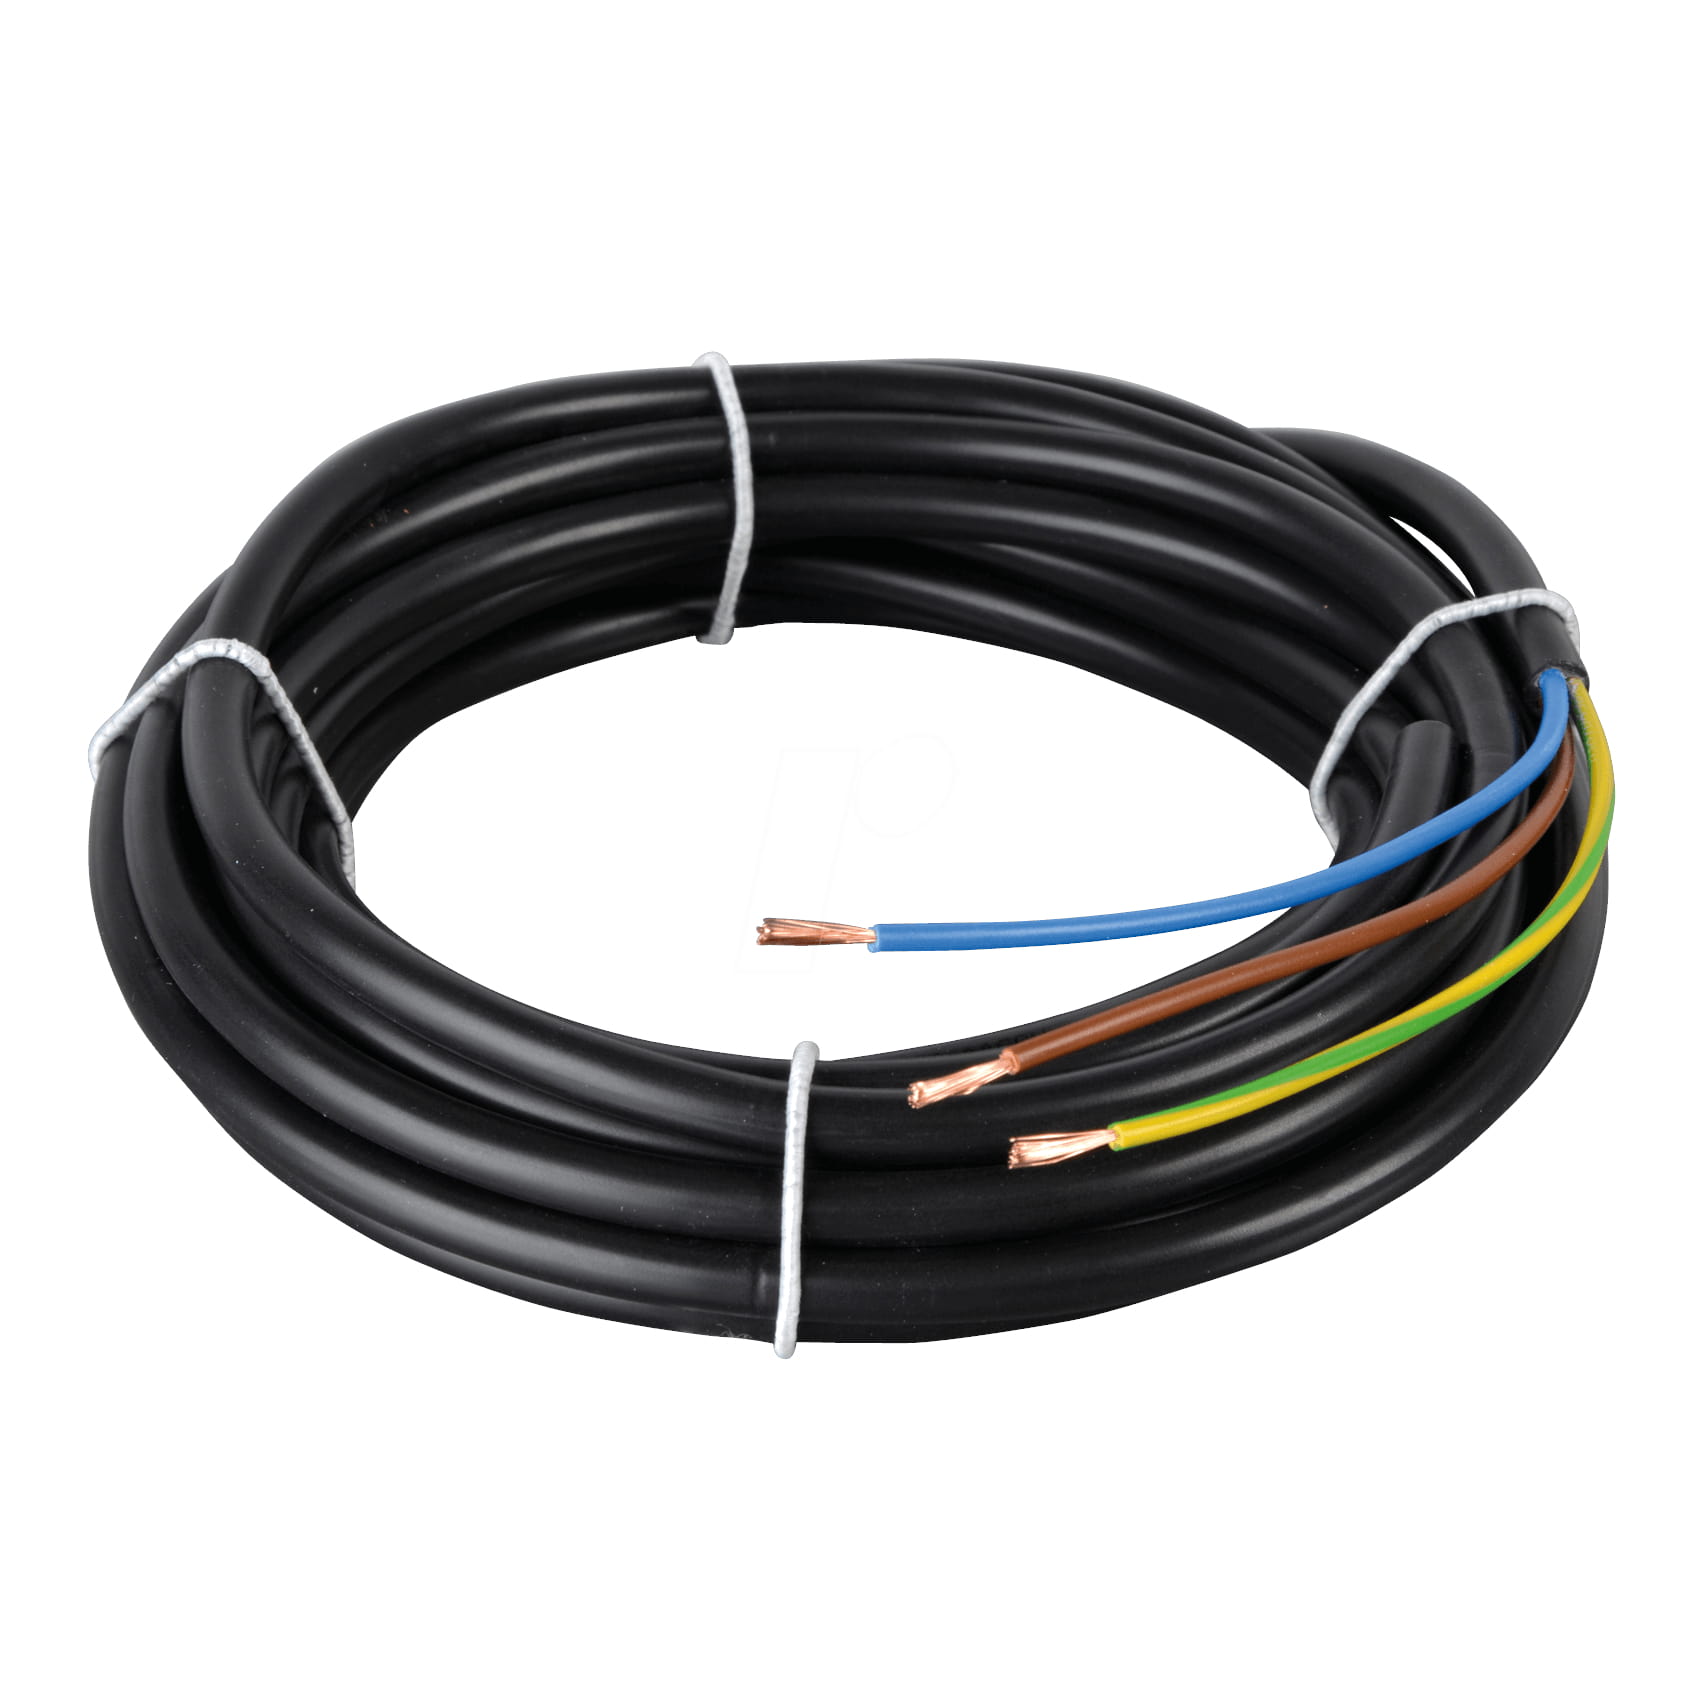 29452 Flexible control cable H05VV-F 3G0.75mm² black Helukabel